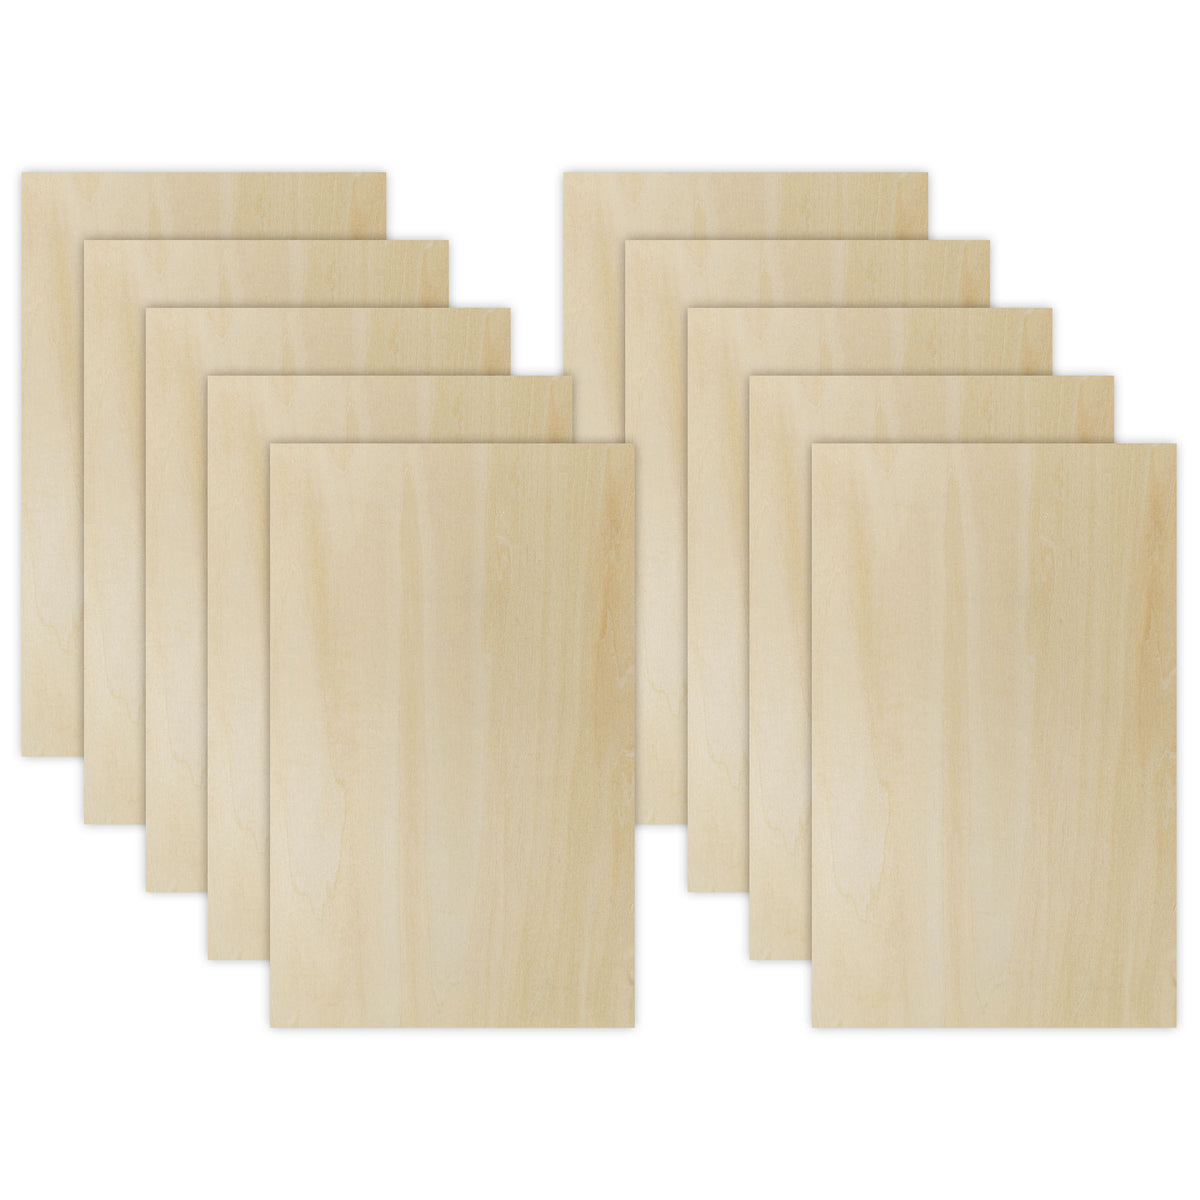 CRAFTIFF Plywood Board Basswood Sheets 1/16 inch, Thin Natural Unfinished  Wood for Crafts, Hobby and Model Making â